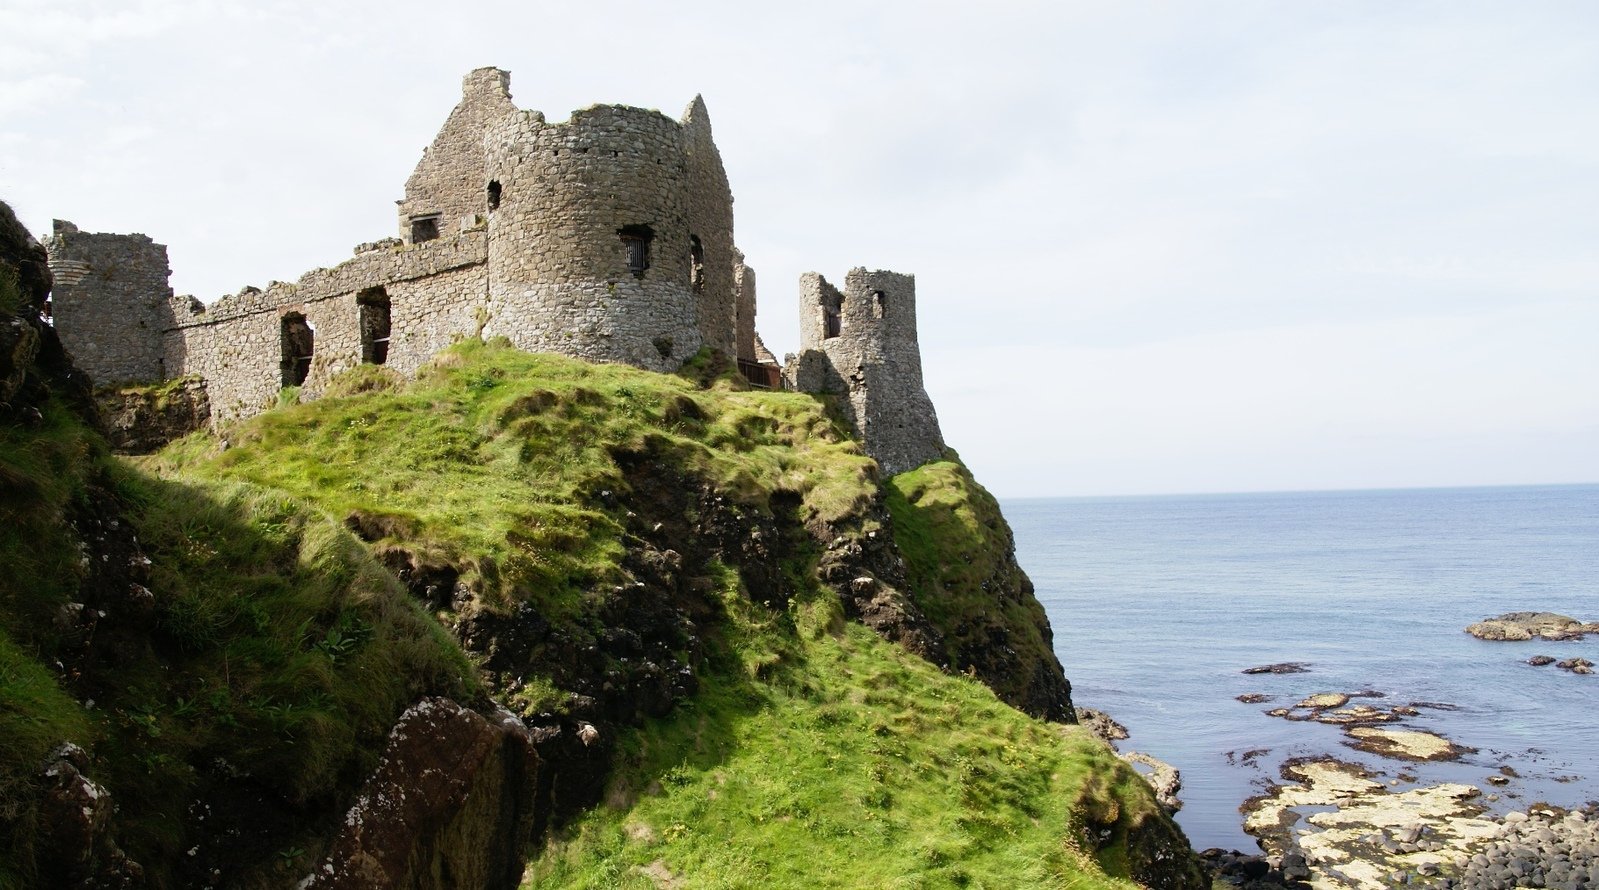 castle ruins overlooking the water and on top of a cliff